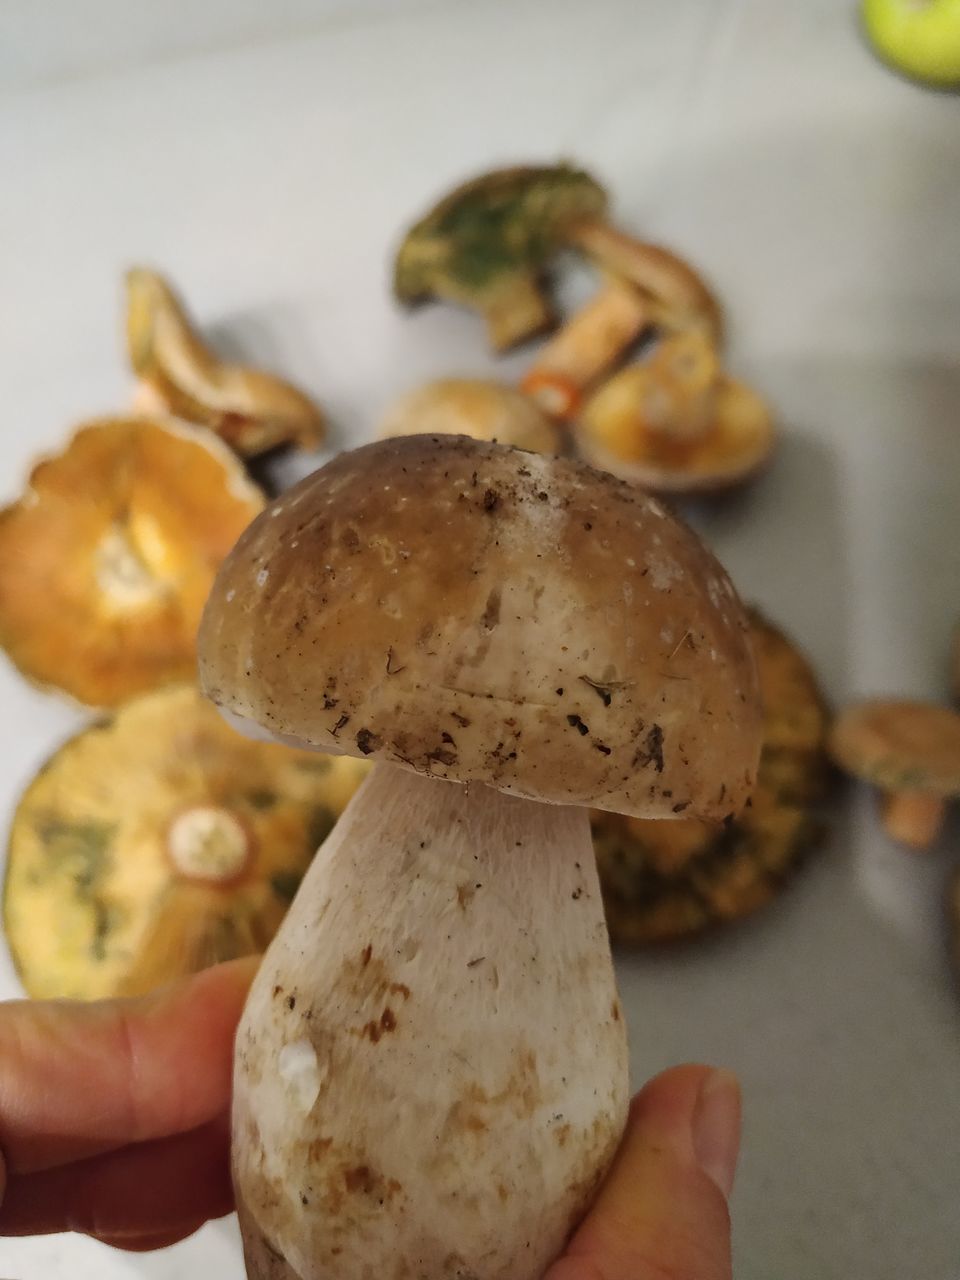 CLOSE-UP OF PERSON HOLDING MUSHROOMS